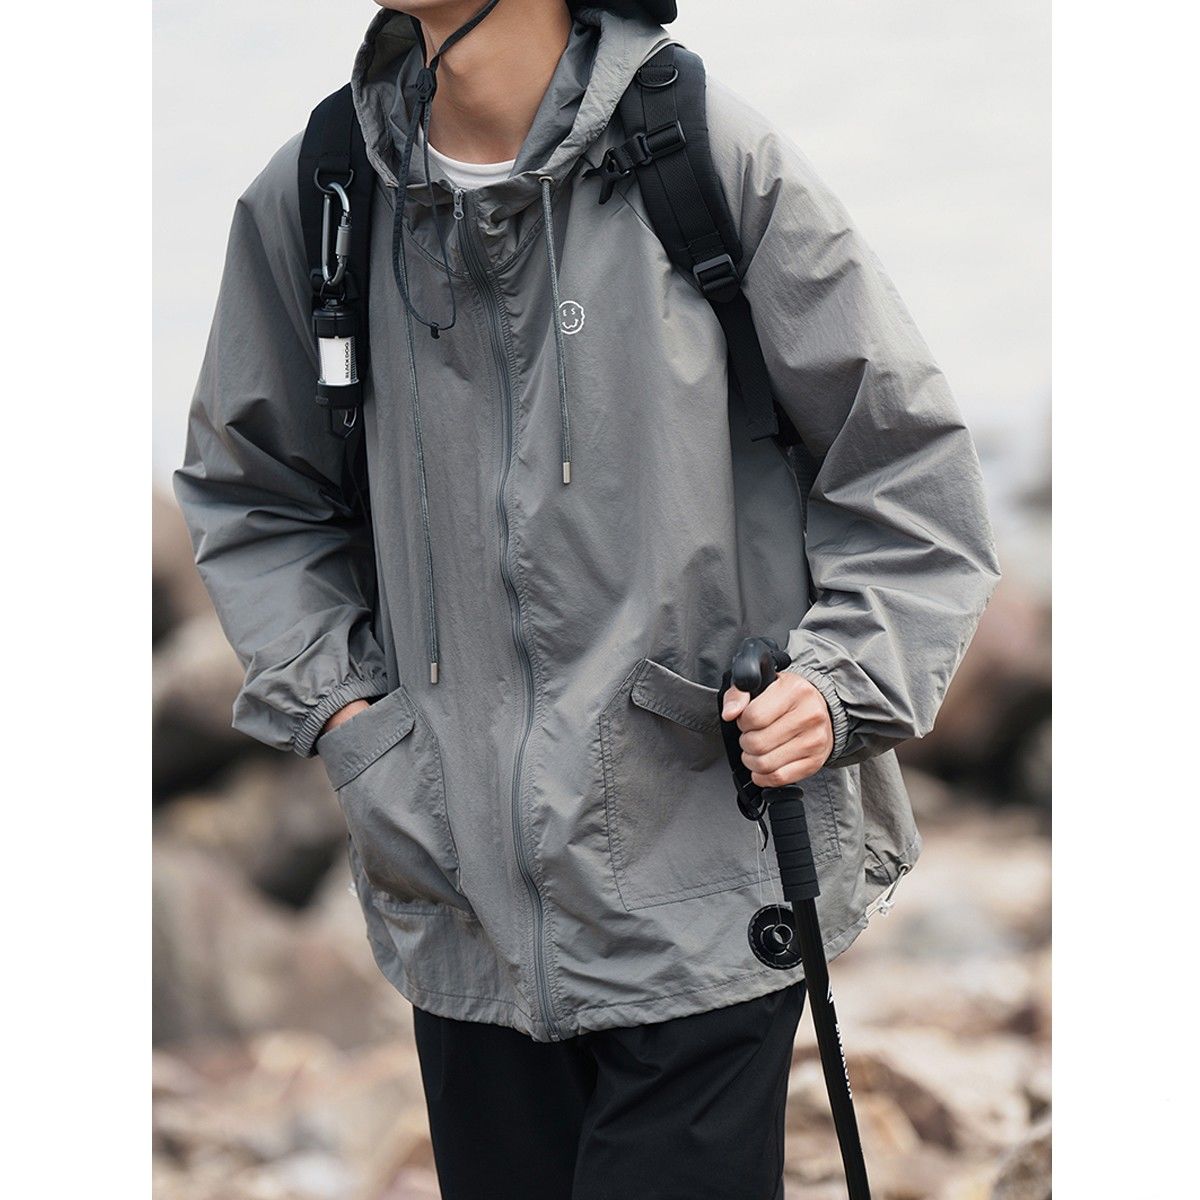 Japanese retro sunscreen men's summer light and thin outdoor sunscreen clothing tide brand loose all-match breathable hooded jacket